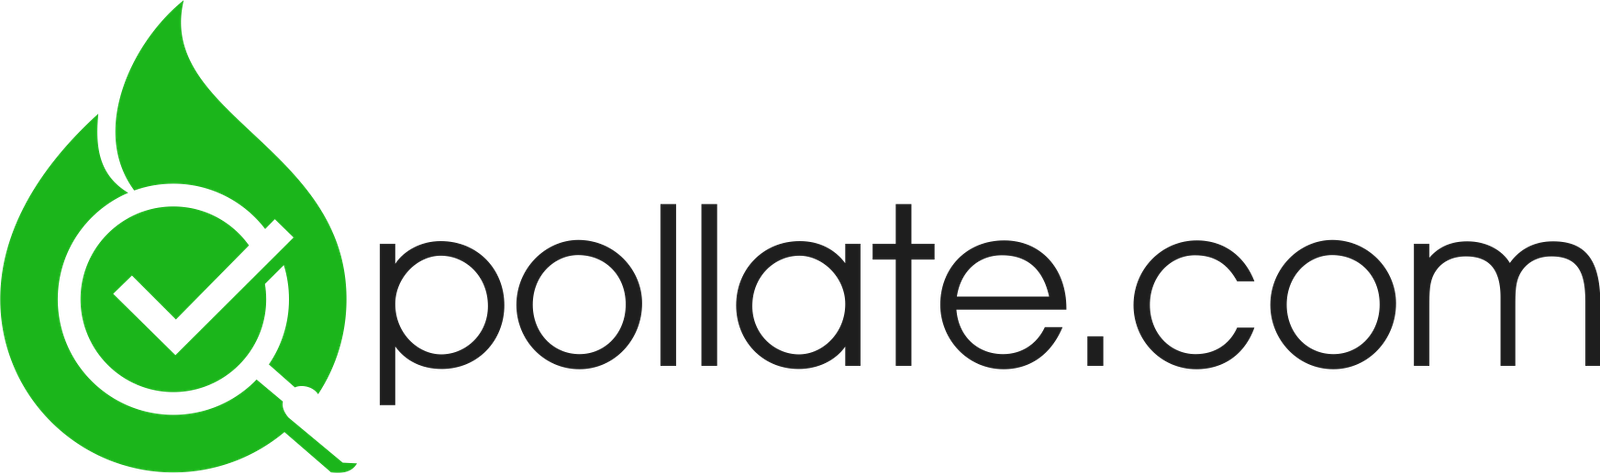 Pollate